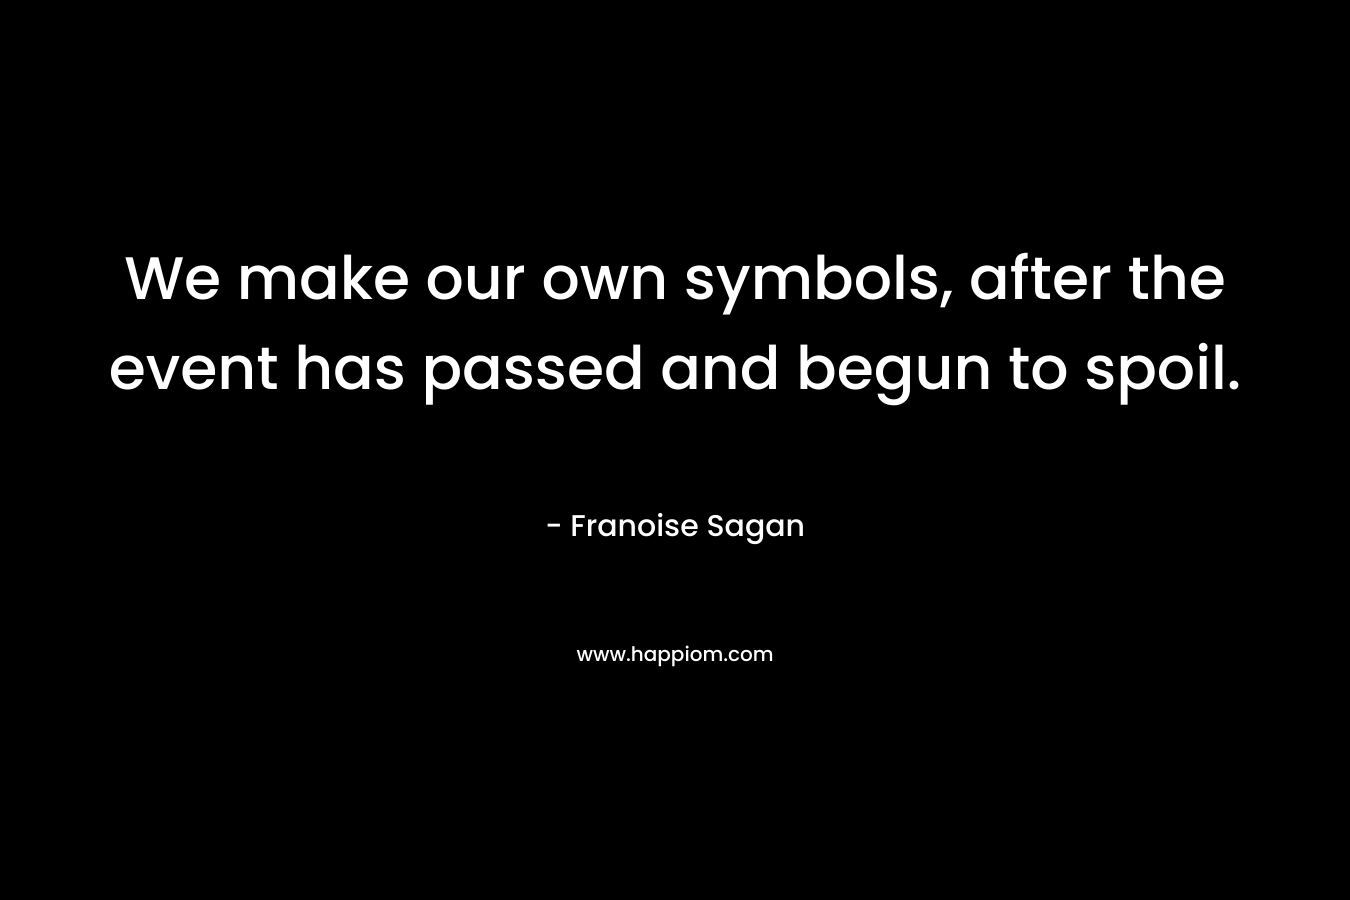 We make our own symbols, after the event has passed and begun to spoil. – Franoise Sagan